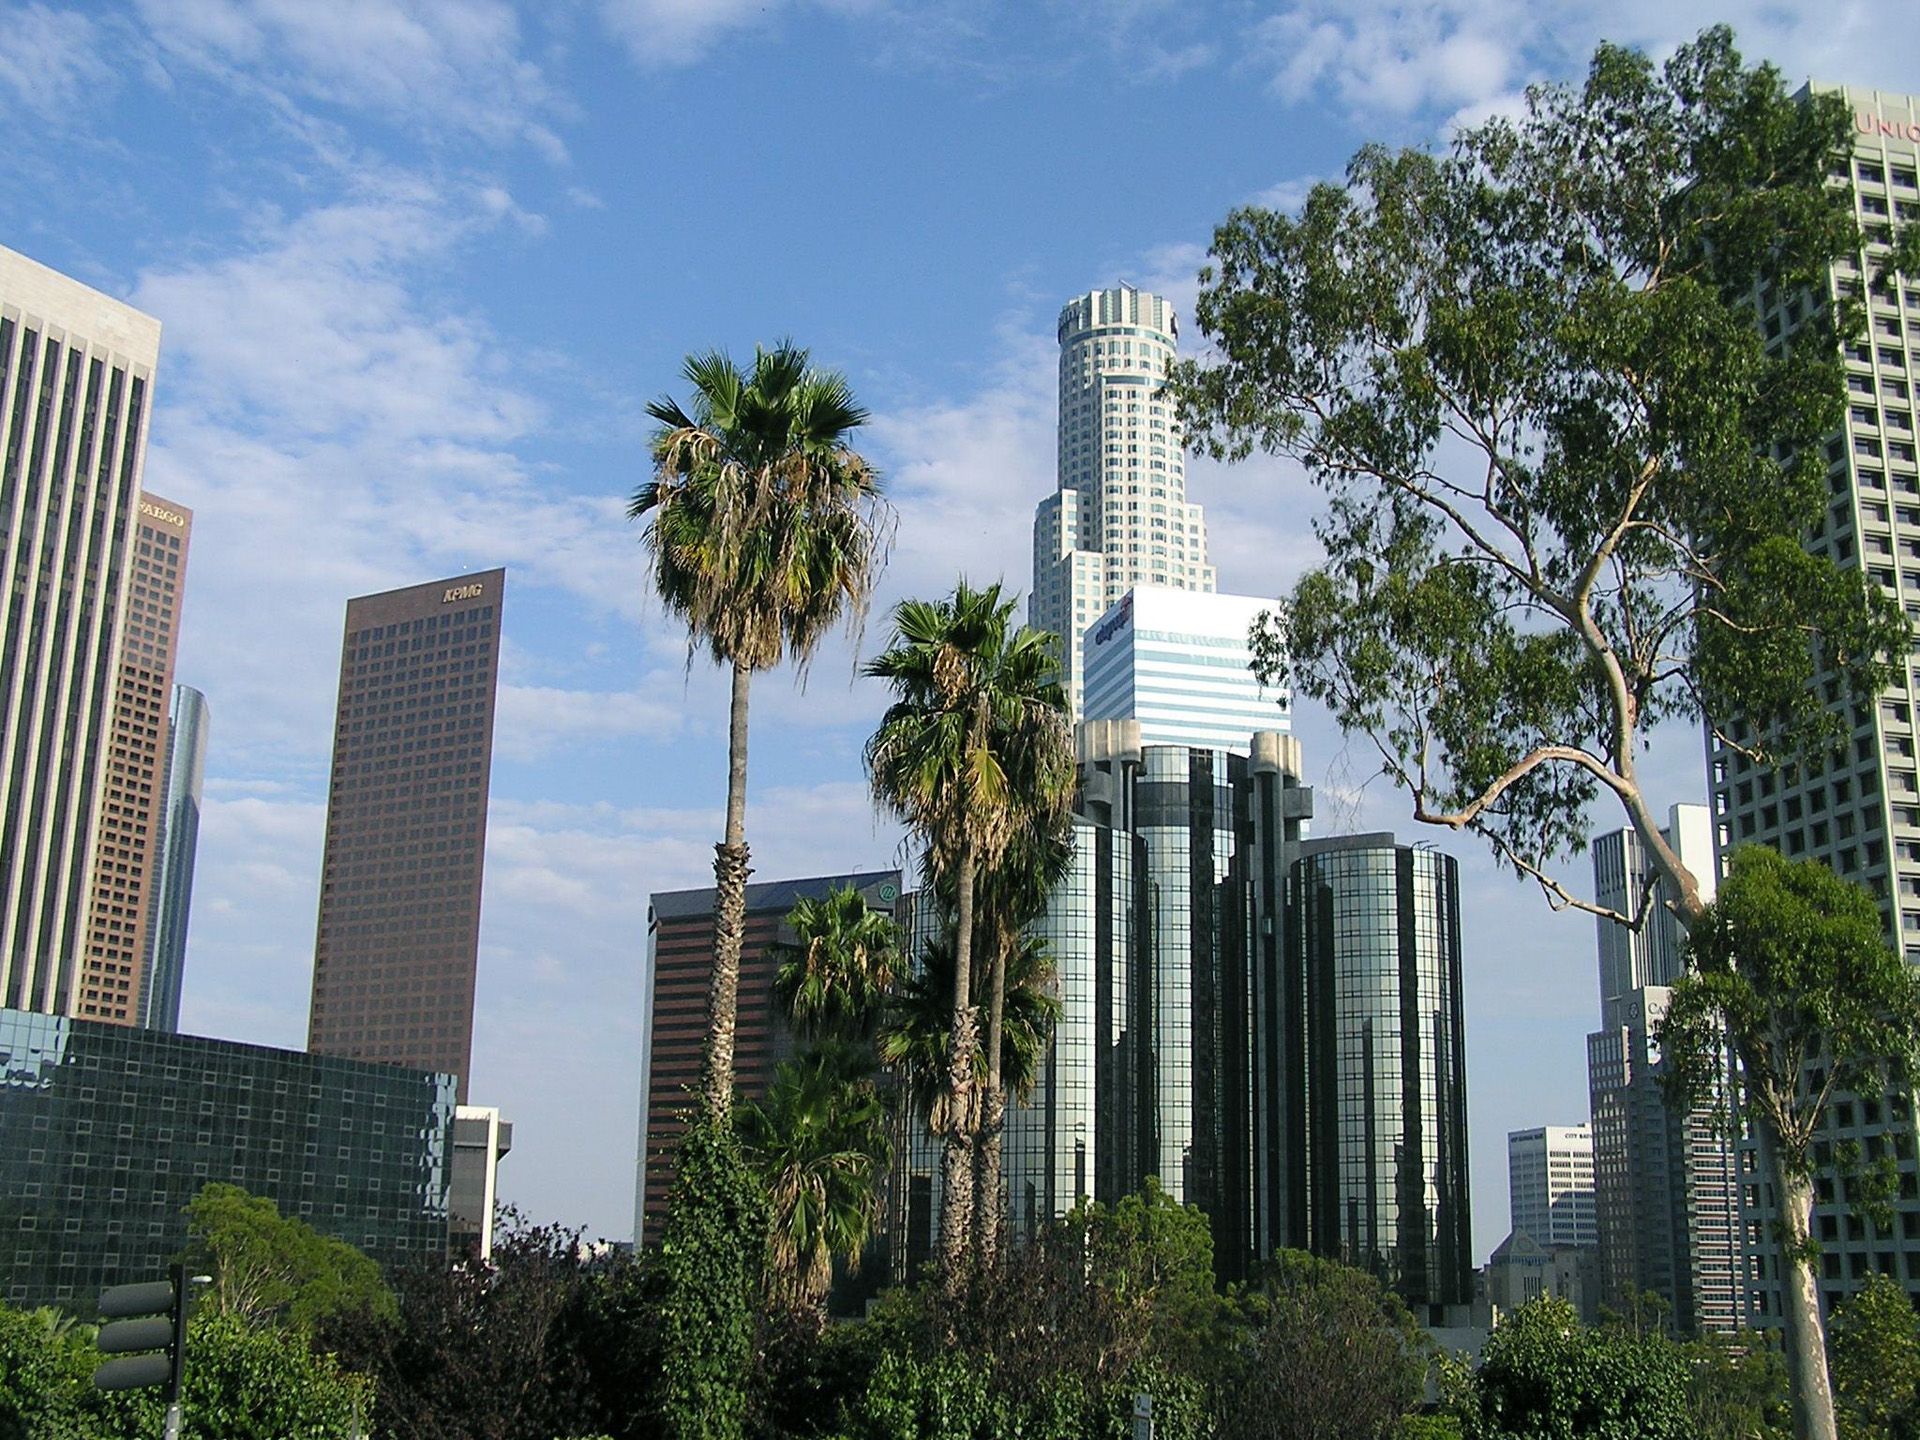 A city skyline with tall buildings and palm trees. - Los Angeles